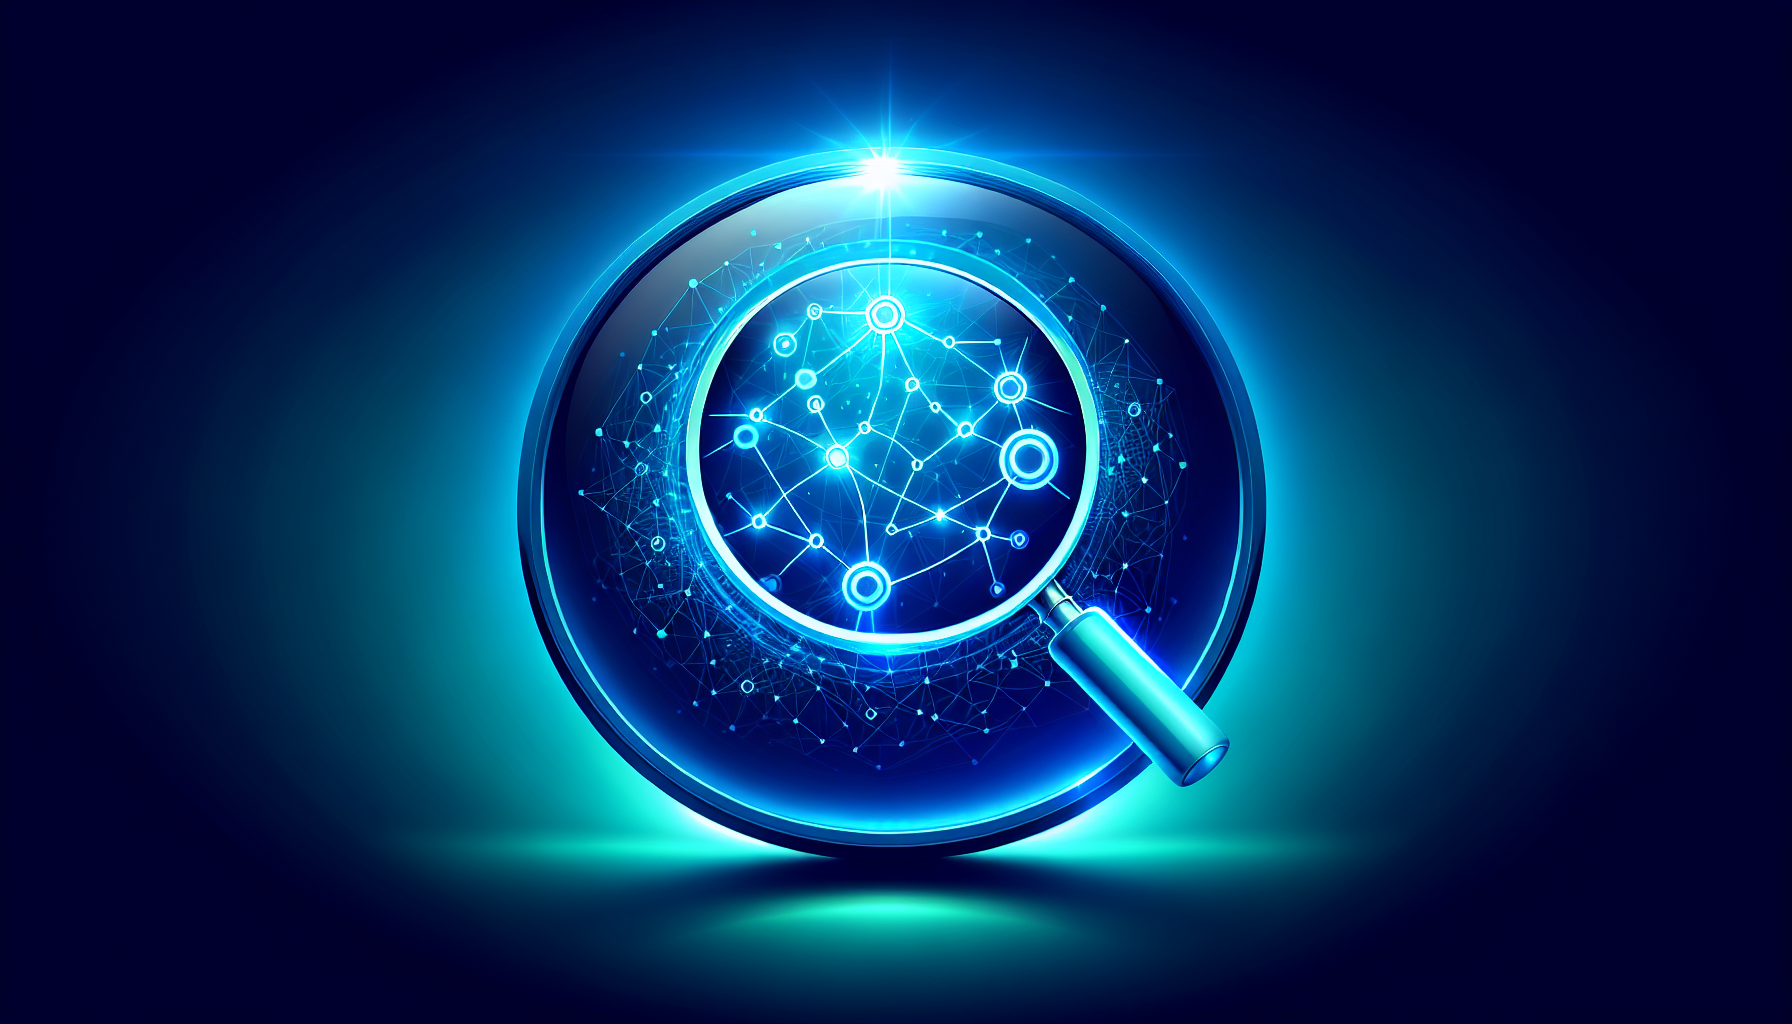 Browser extension icon with a magnifying glass symbolizing insight and discovery